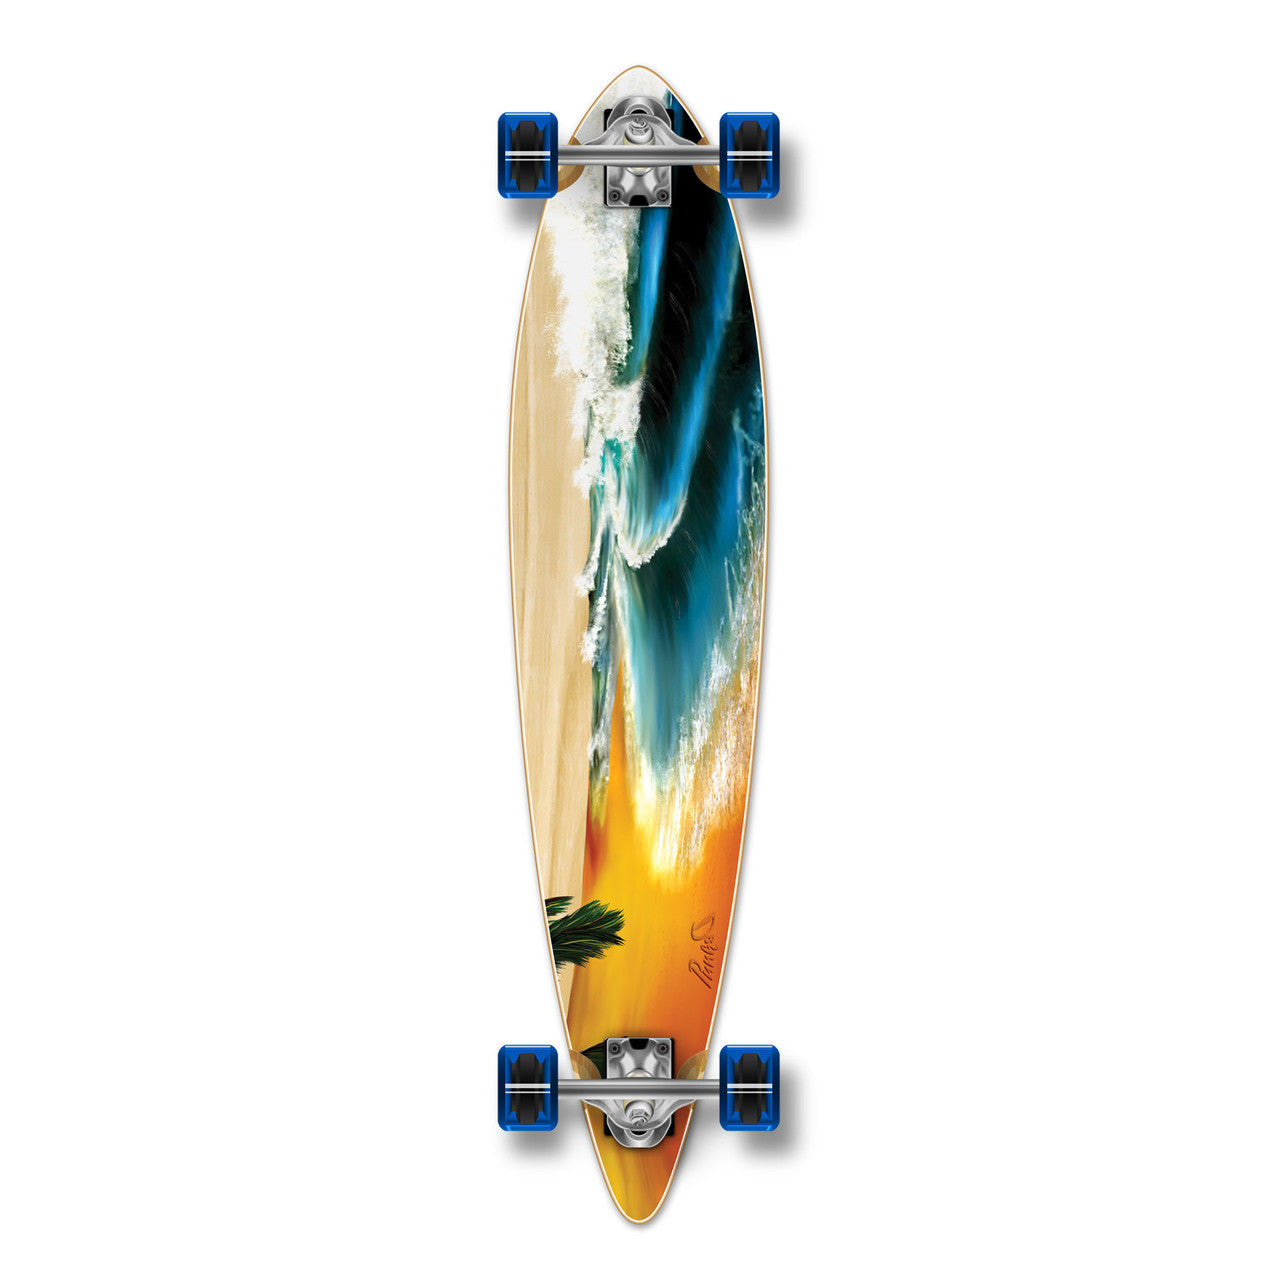 Yocaher Pintail Longboard Complete - Beach